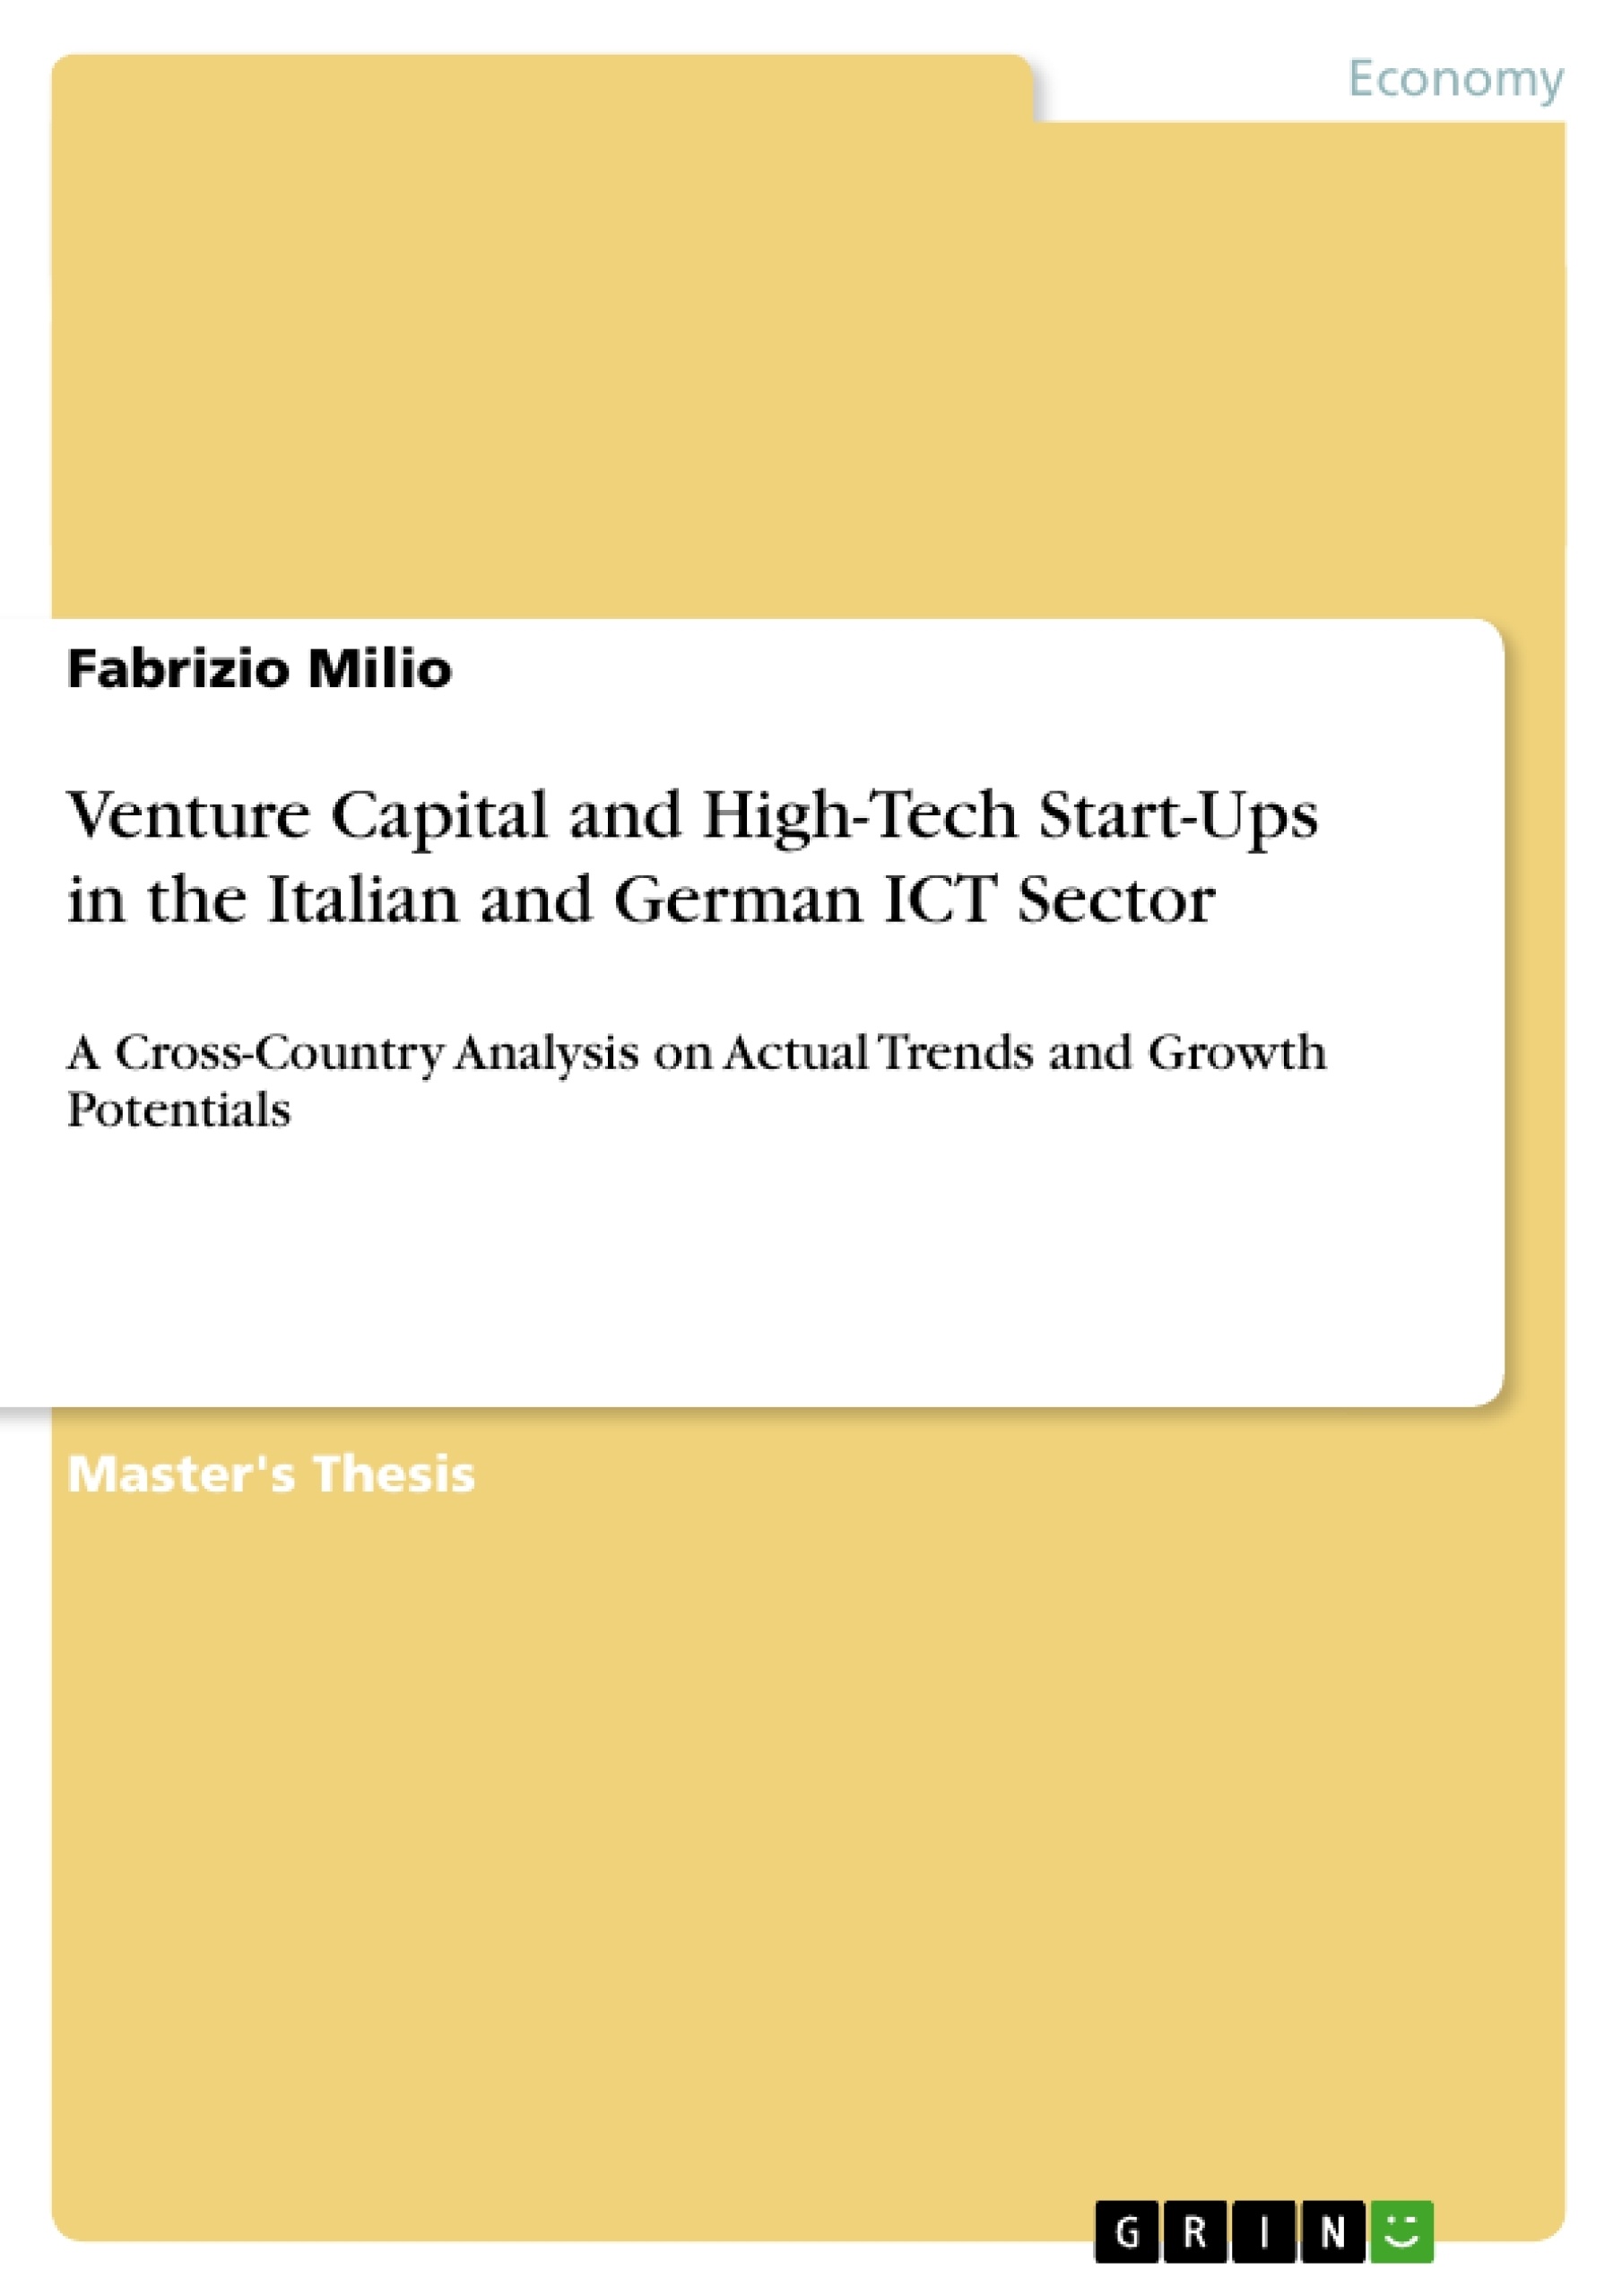 Titel: Venture Capital and High-Tech Start-Ups in the Italian and German ICT Sector